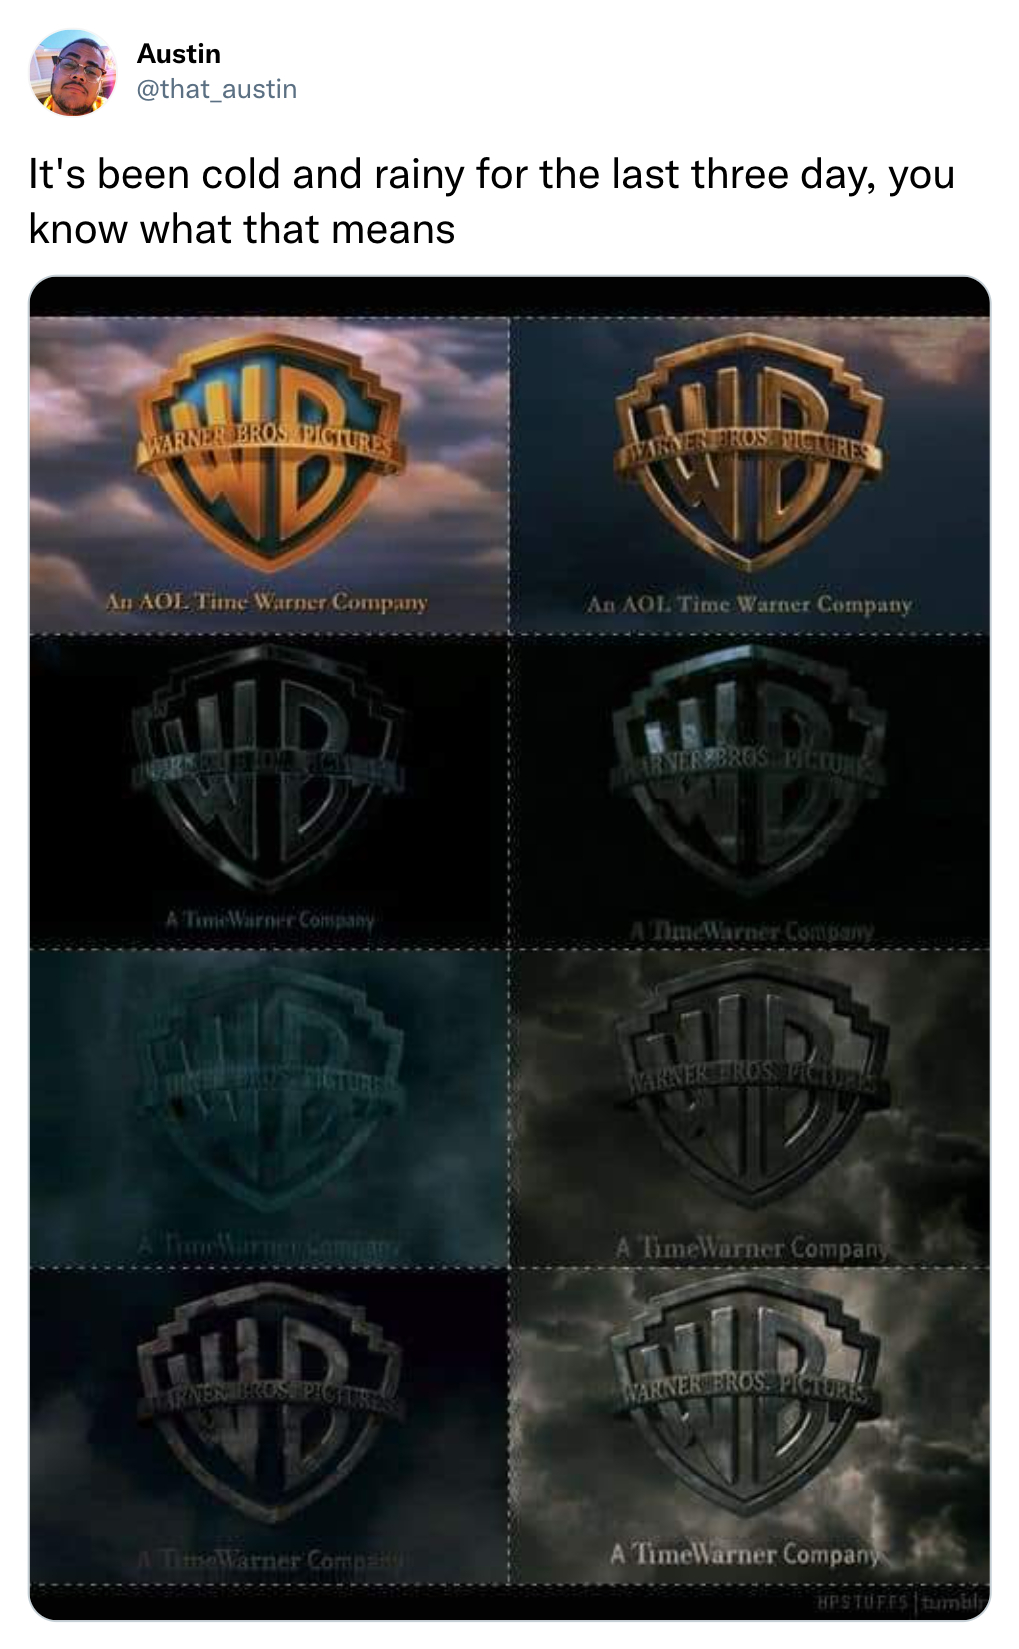 harry potter warner bros darker - Austin It's been cold and rainy for the last three day, you know what that means We Canon A Long 1 A Timur Compan Amerner Compan